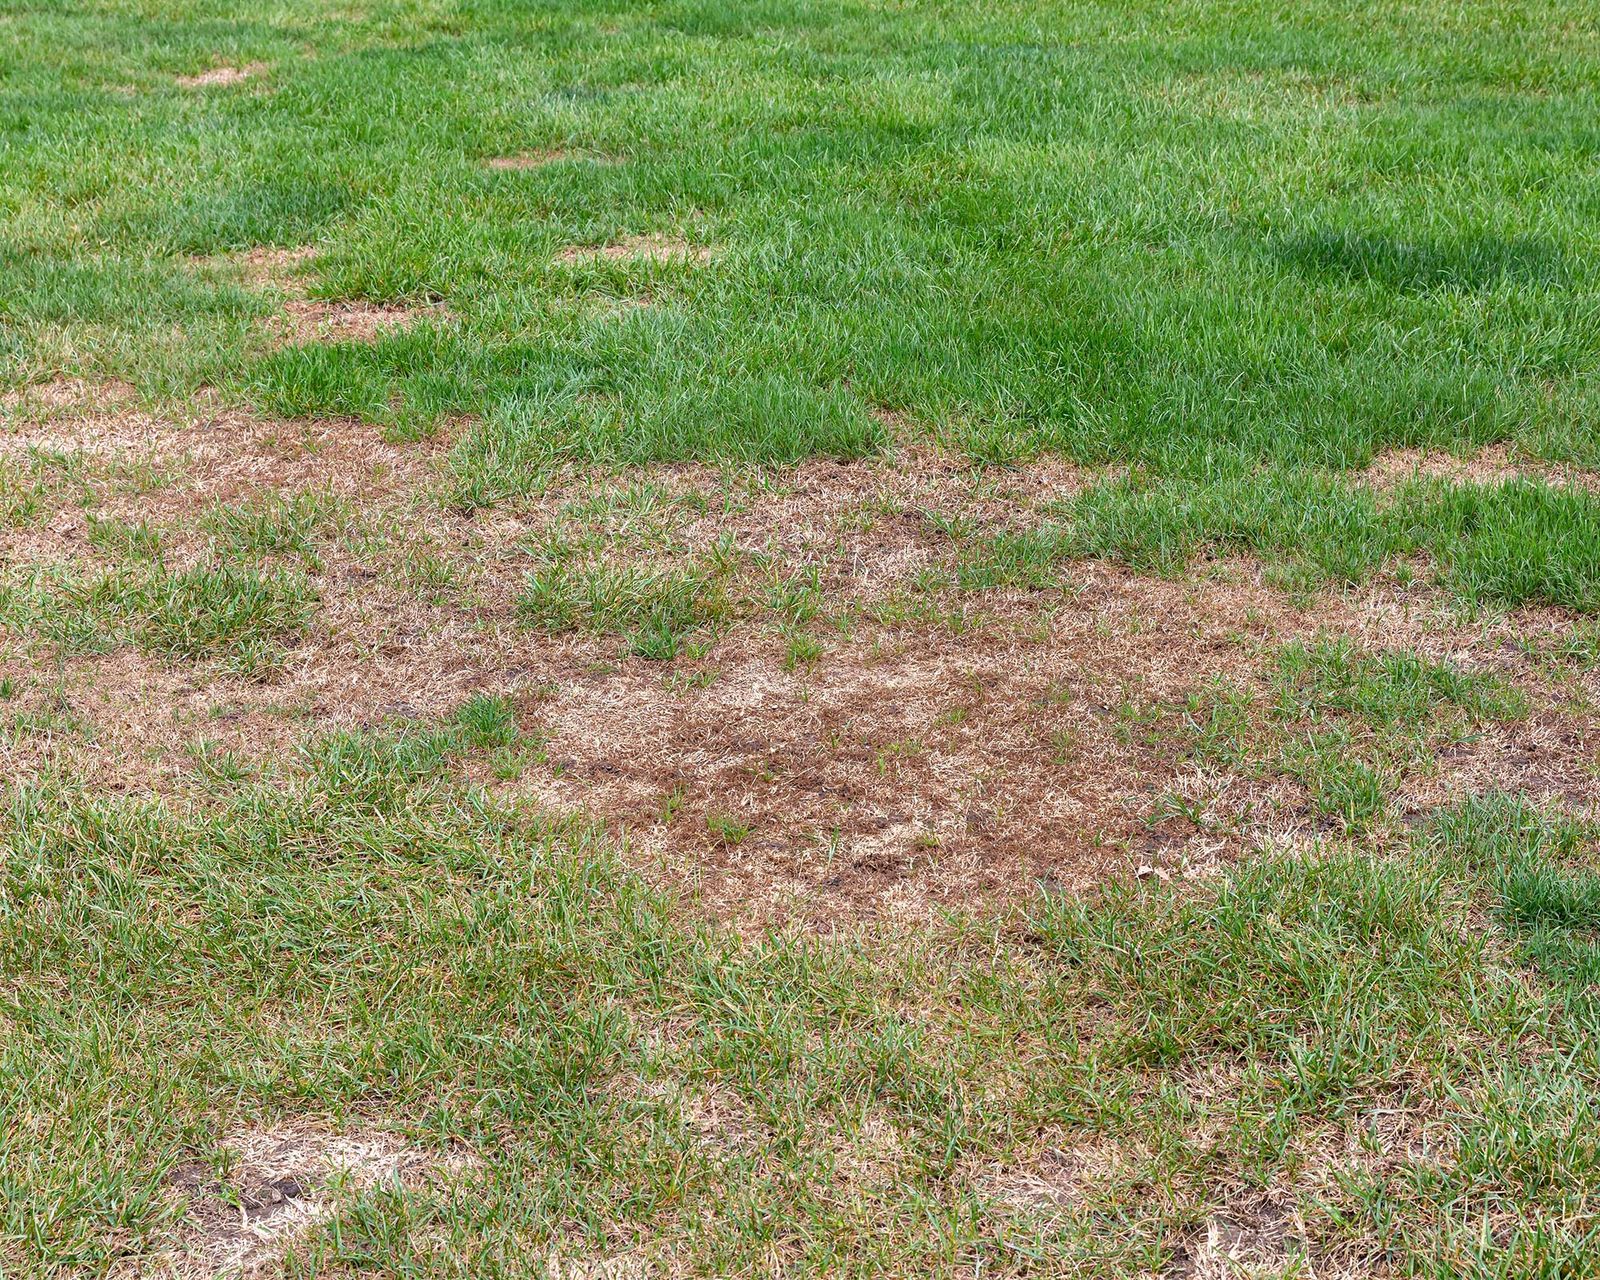 How to get rid of lawn grubs naturally: protect your turf | Gardeningetc